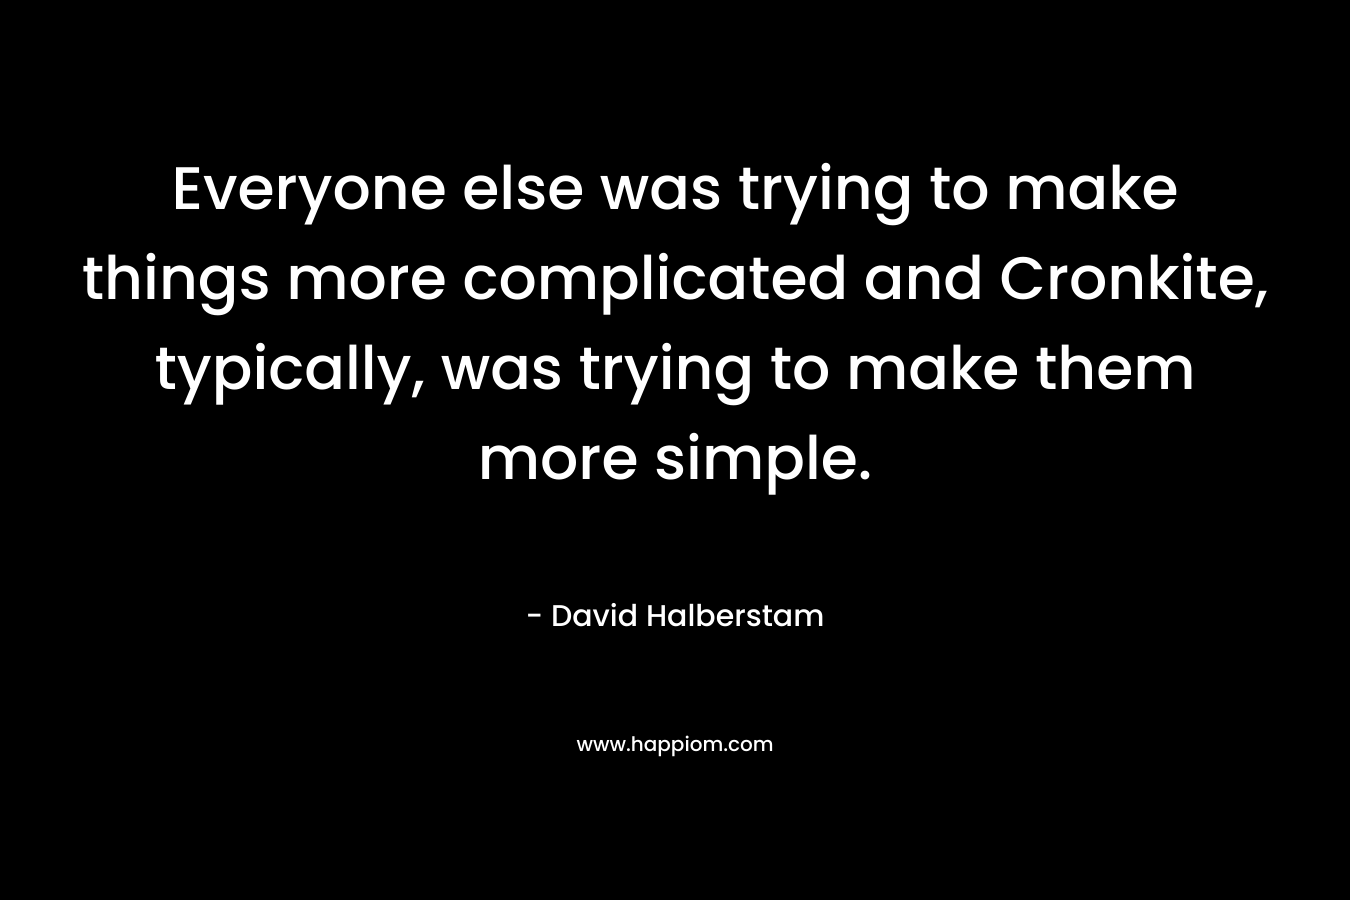 Everyone else was trying to make things more complicated and Cronkite, typically, was trying to make them more simple. – David Halberstam